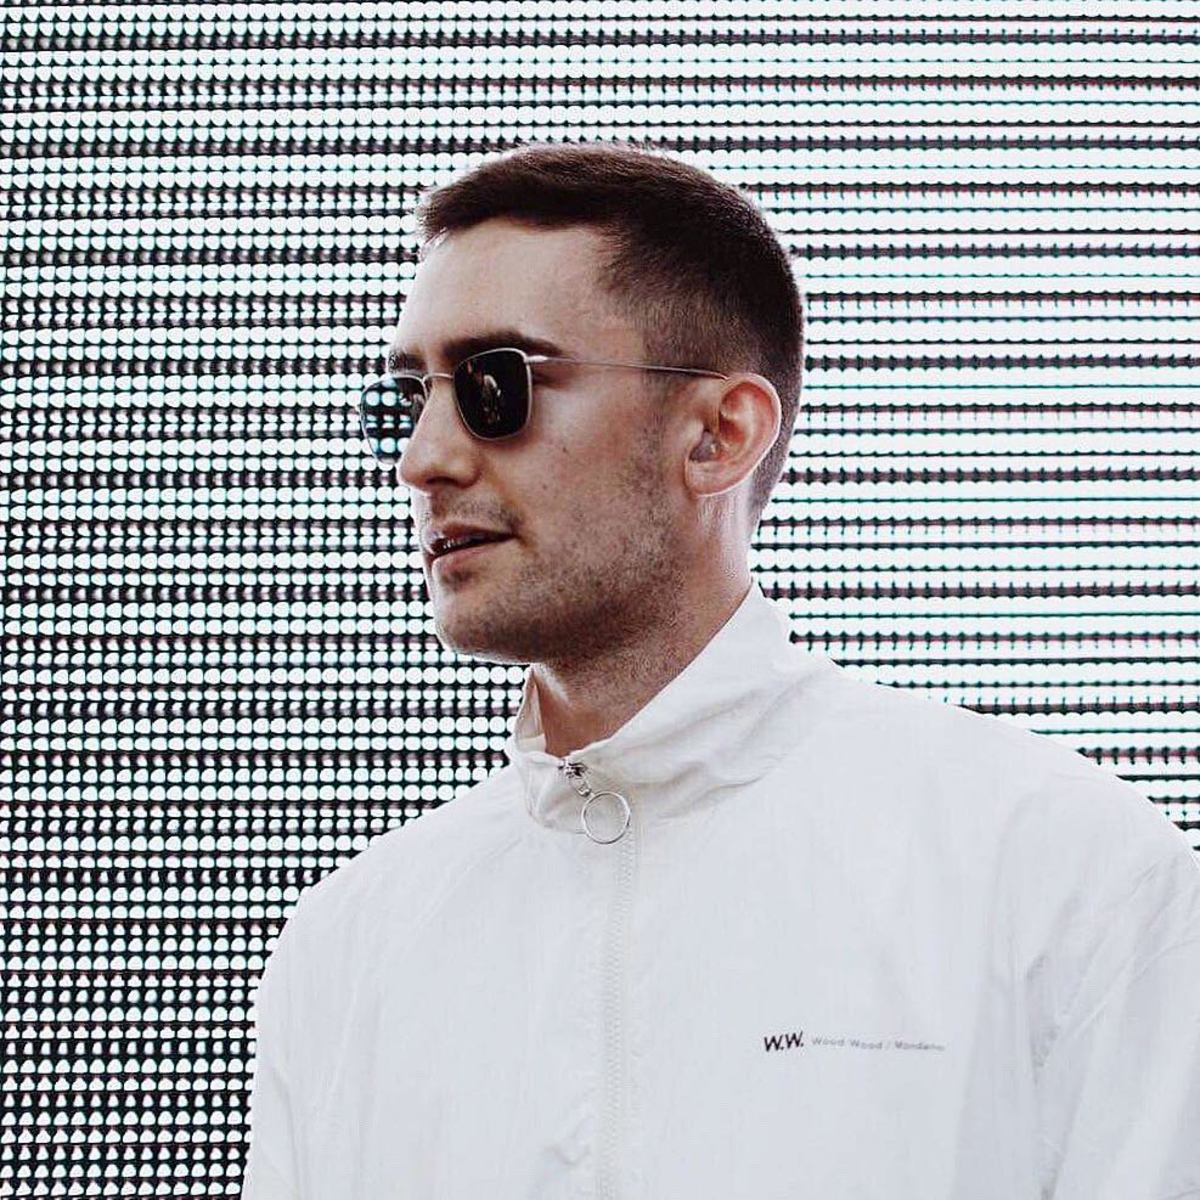 Toby Green Revives the Old School Electro Sound in Rave-Inspired 